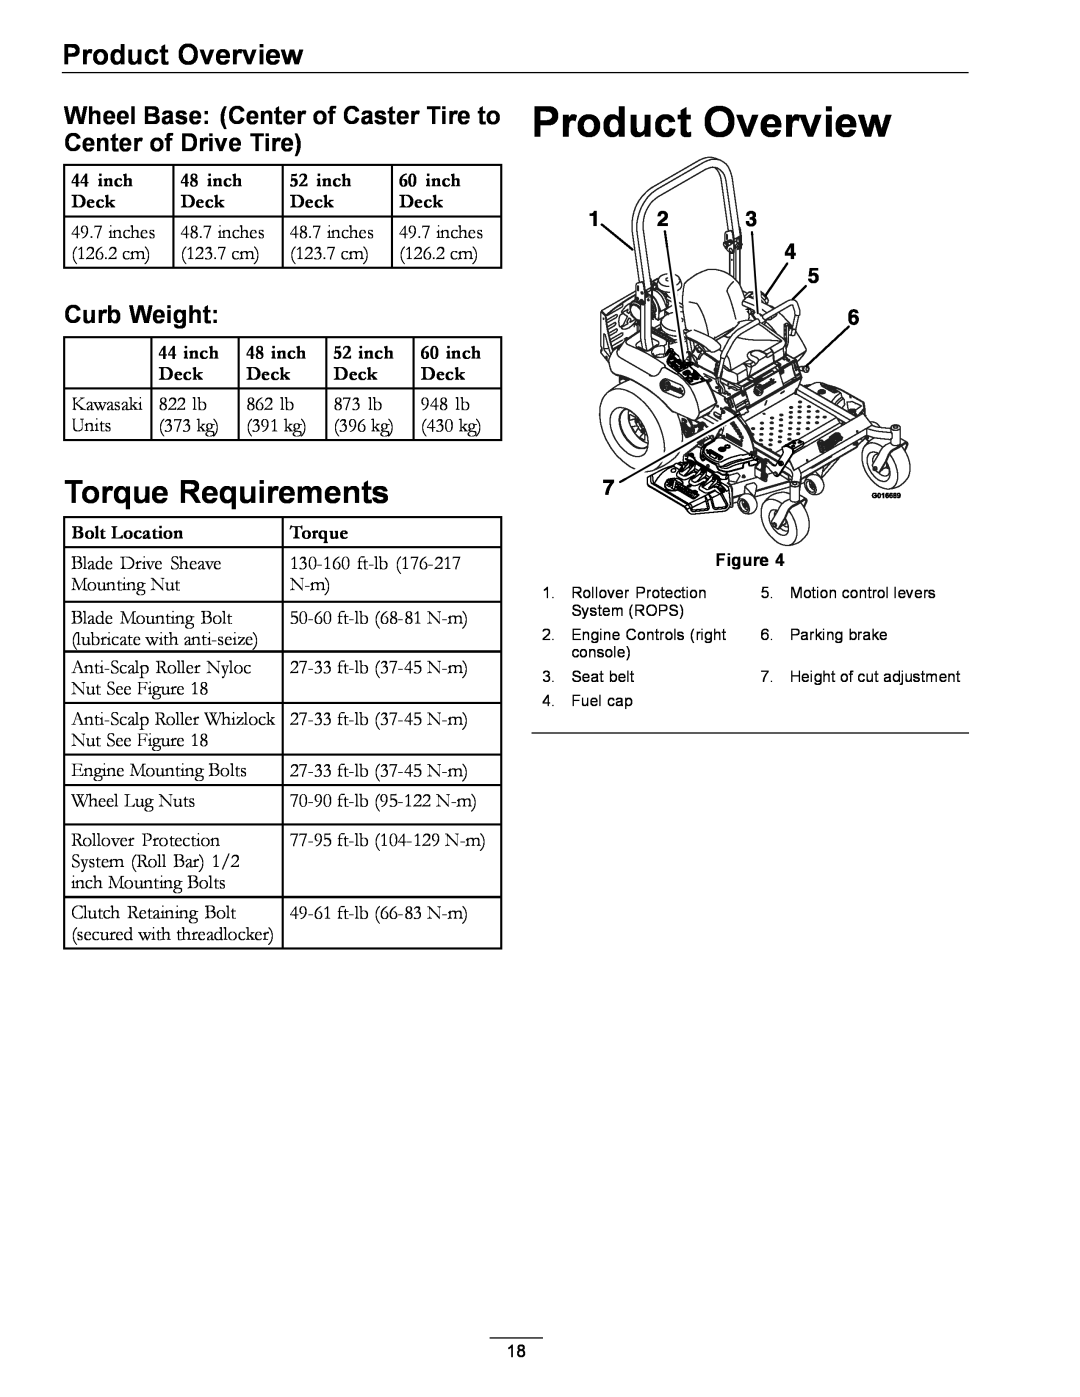 Exmark 000 & higher, 312 manual Product Overview, Torque Requirements, Curb Weight 